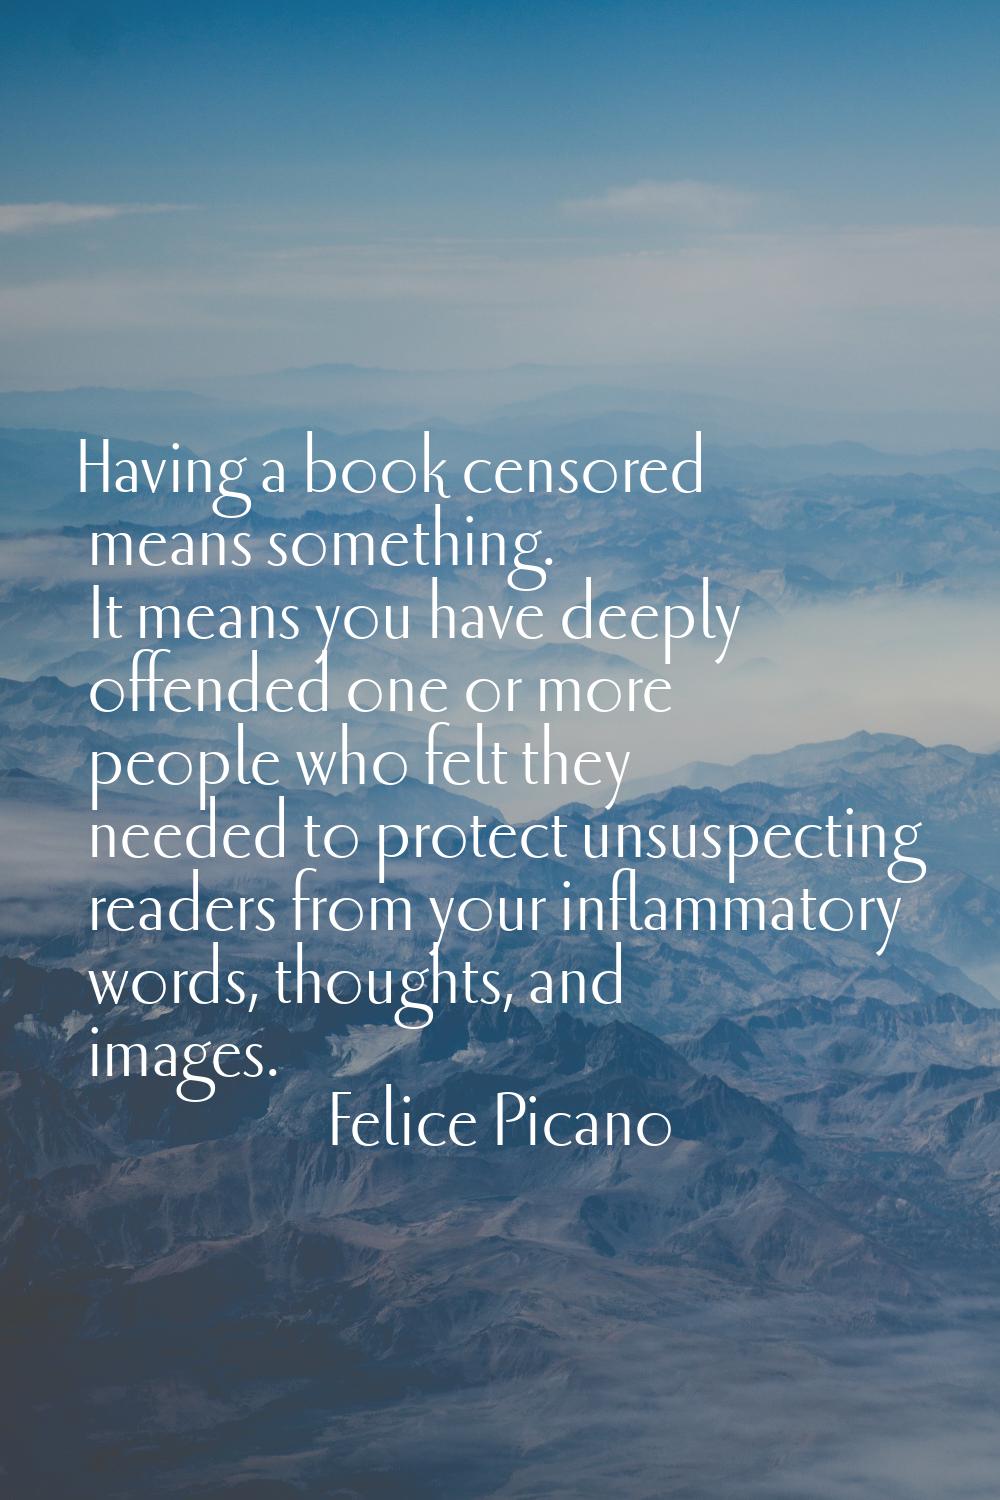 Having a book censored means something. It means you have deeply offended one or more people who fe